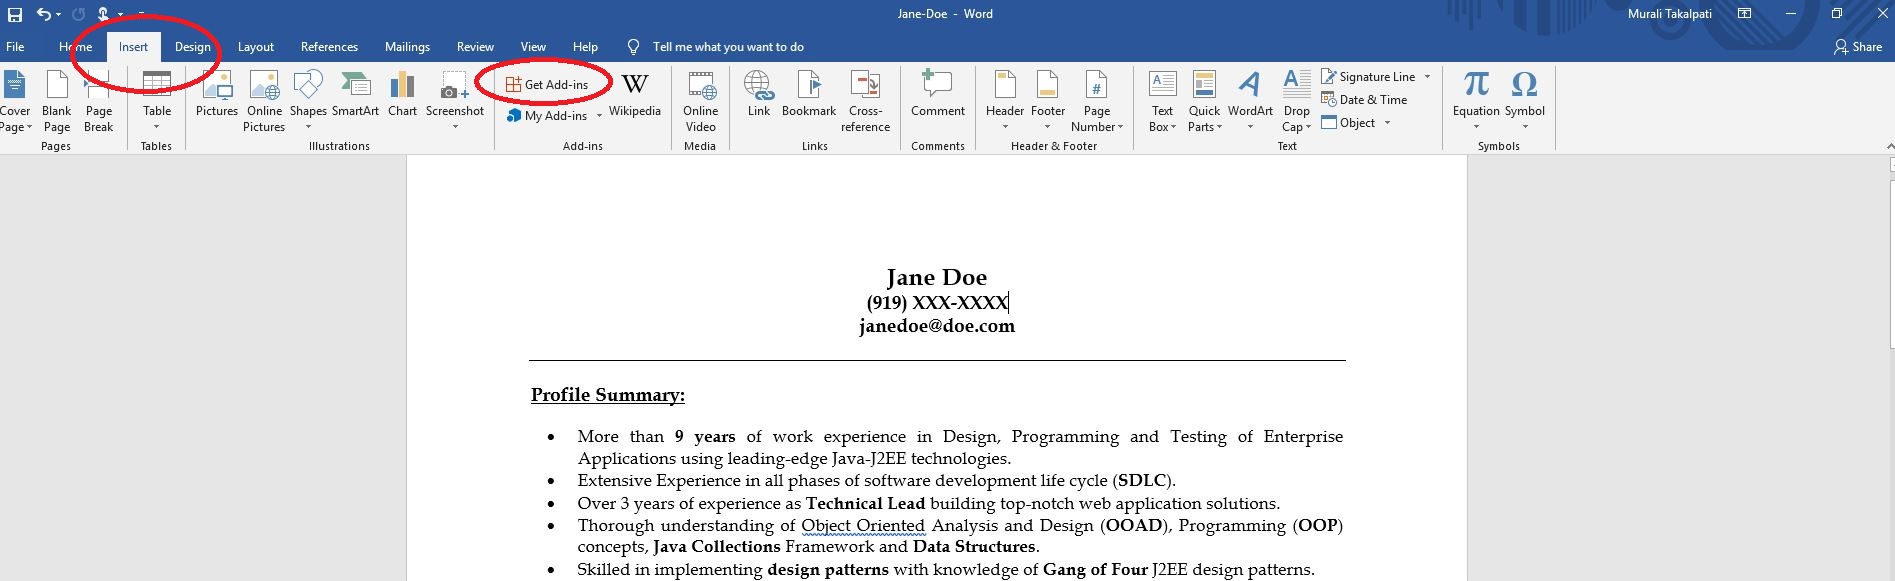 How to add the iReformat App from App Store in Microsoft Word 2013